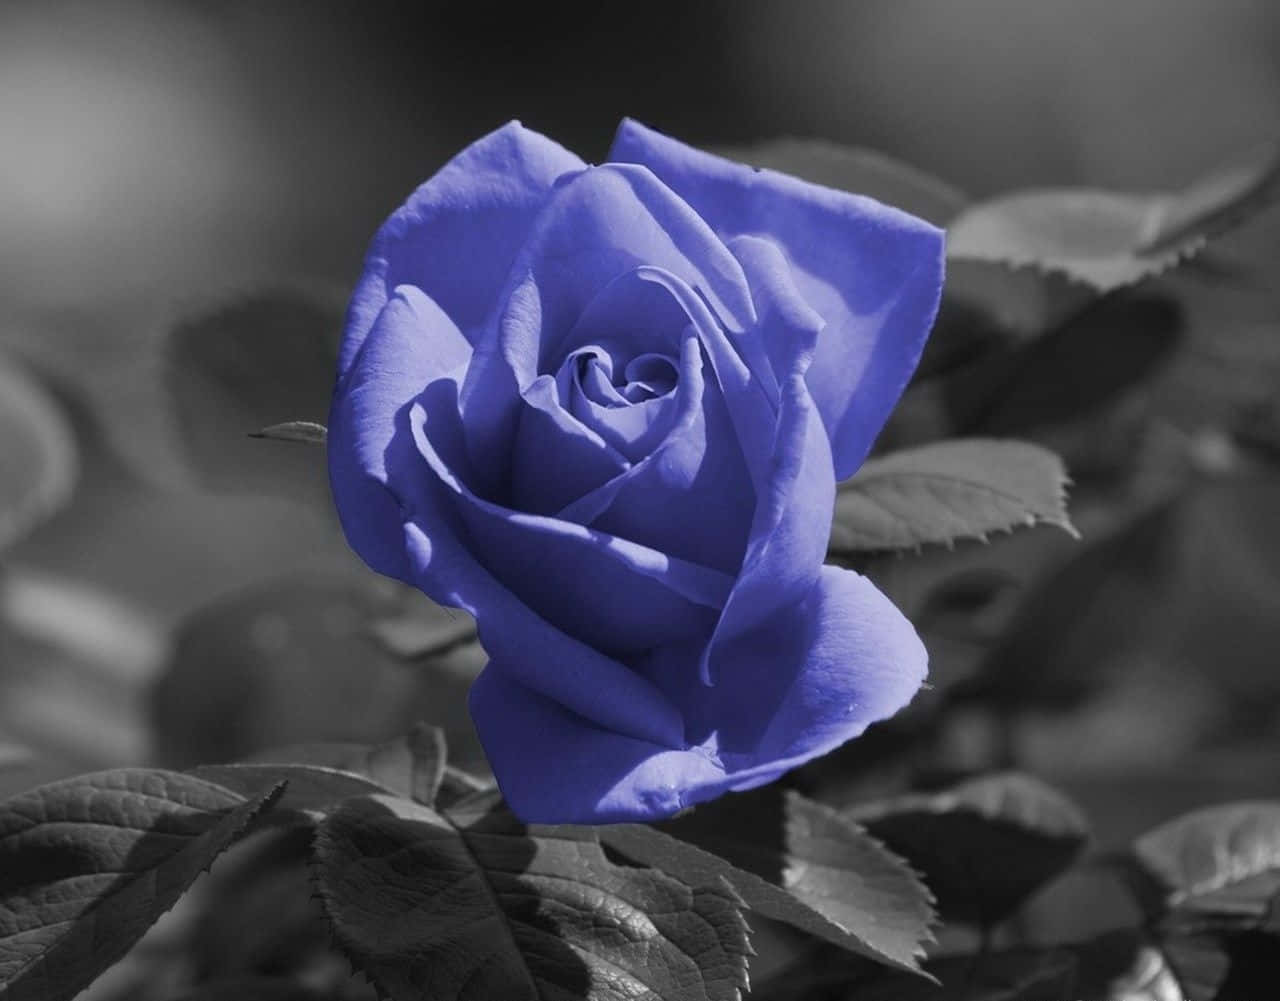 100+] Blue Rose Wallpapers | Wallpapers.Com